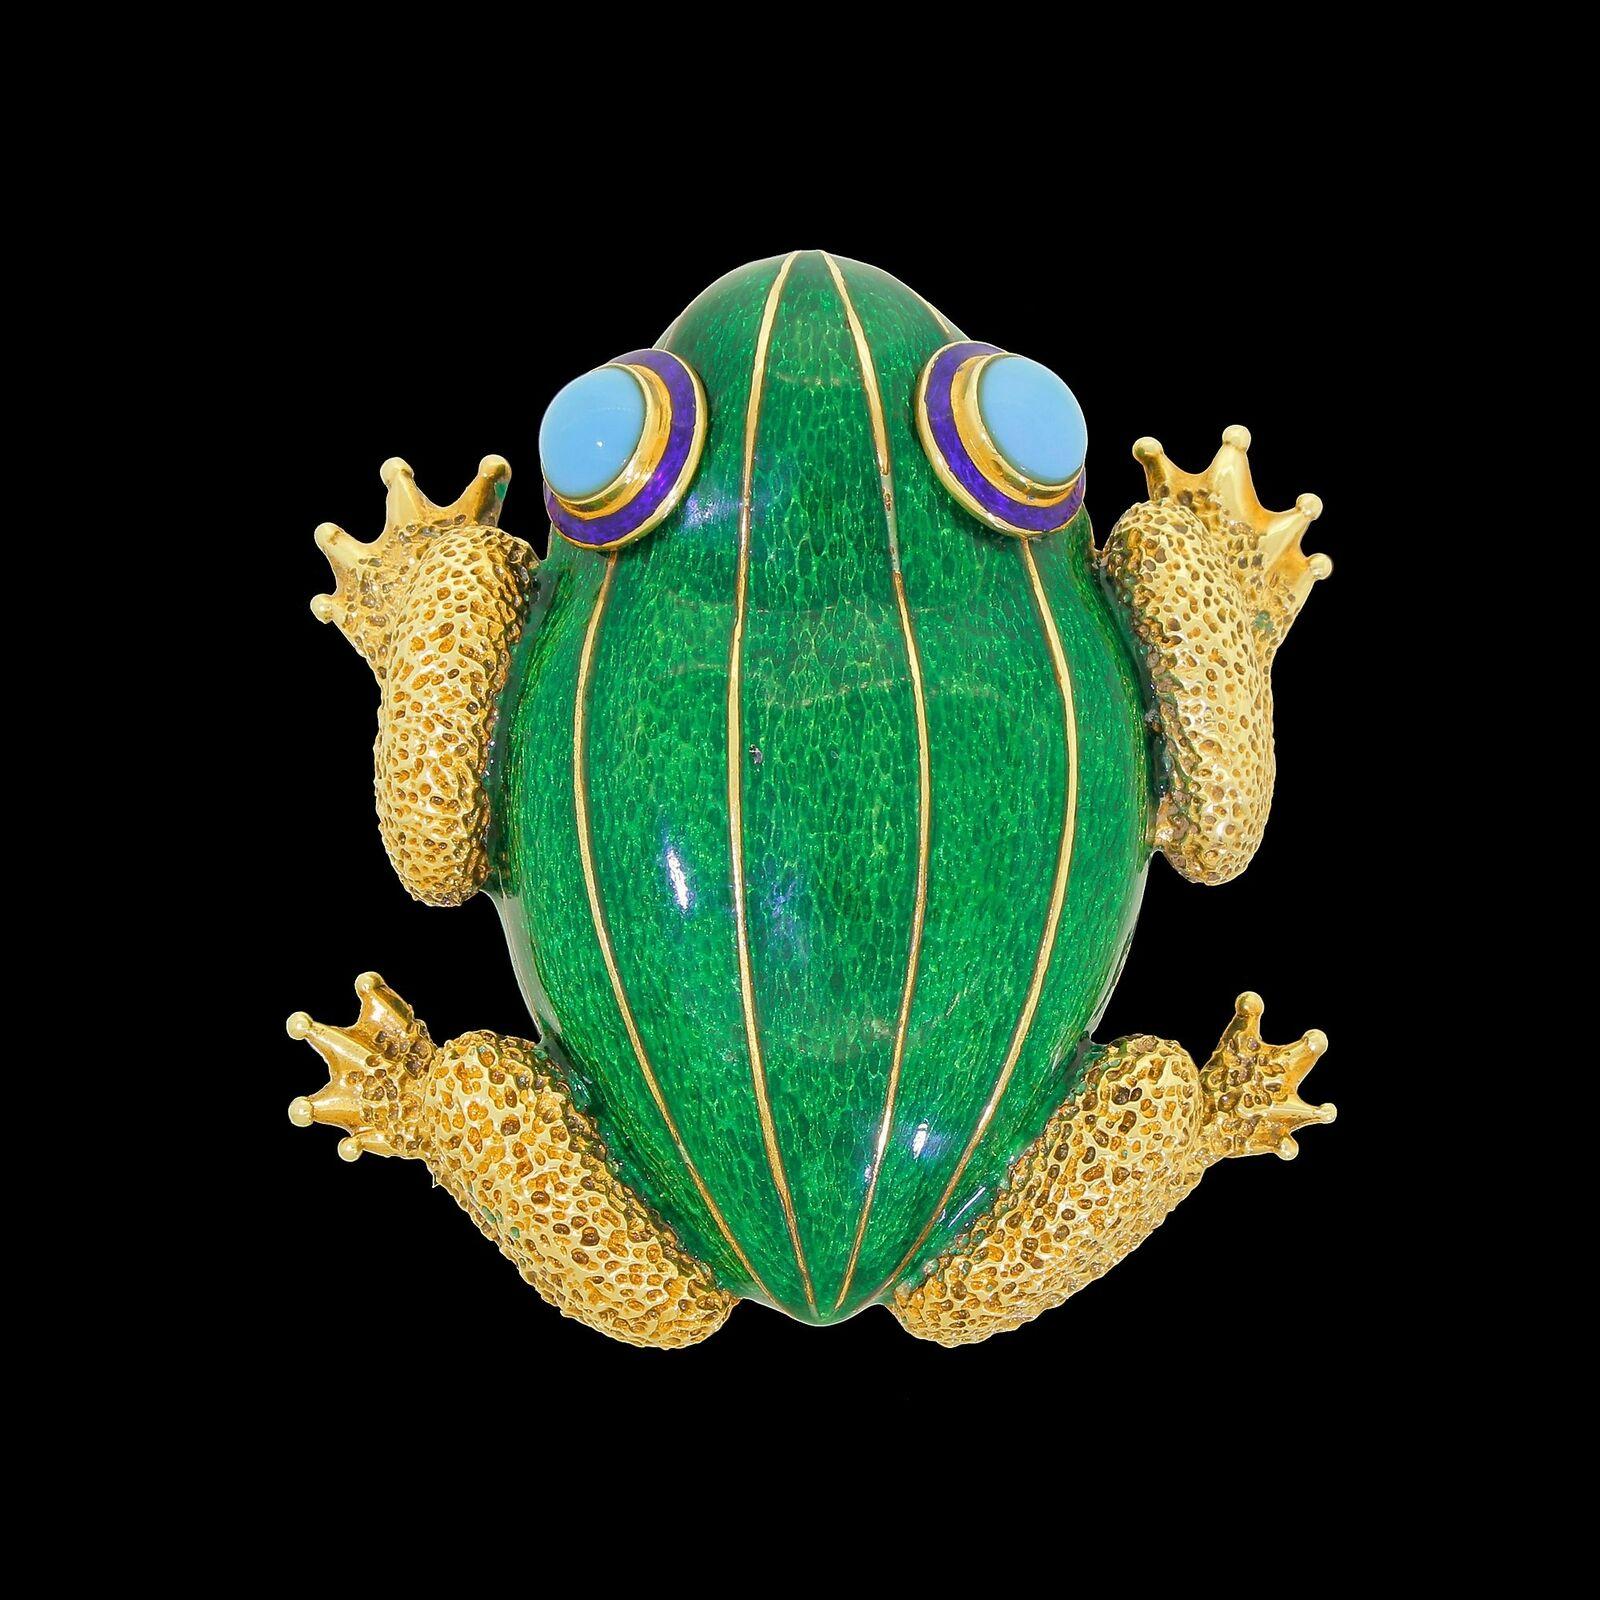 Details & Condition: Exquisite 14 Karat yellow gold tree frog with vibrant green enamel and perfectly matched sky blue Persian Turquoise cabochon eyes.
A 3d life like appearance is evident throughout the attention to detailing is second to none.
His